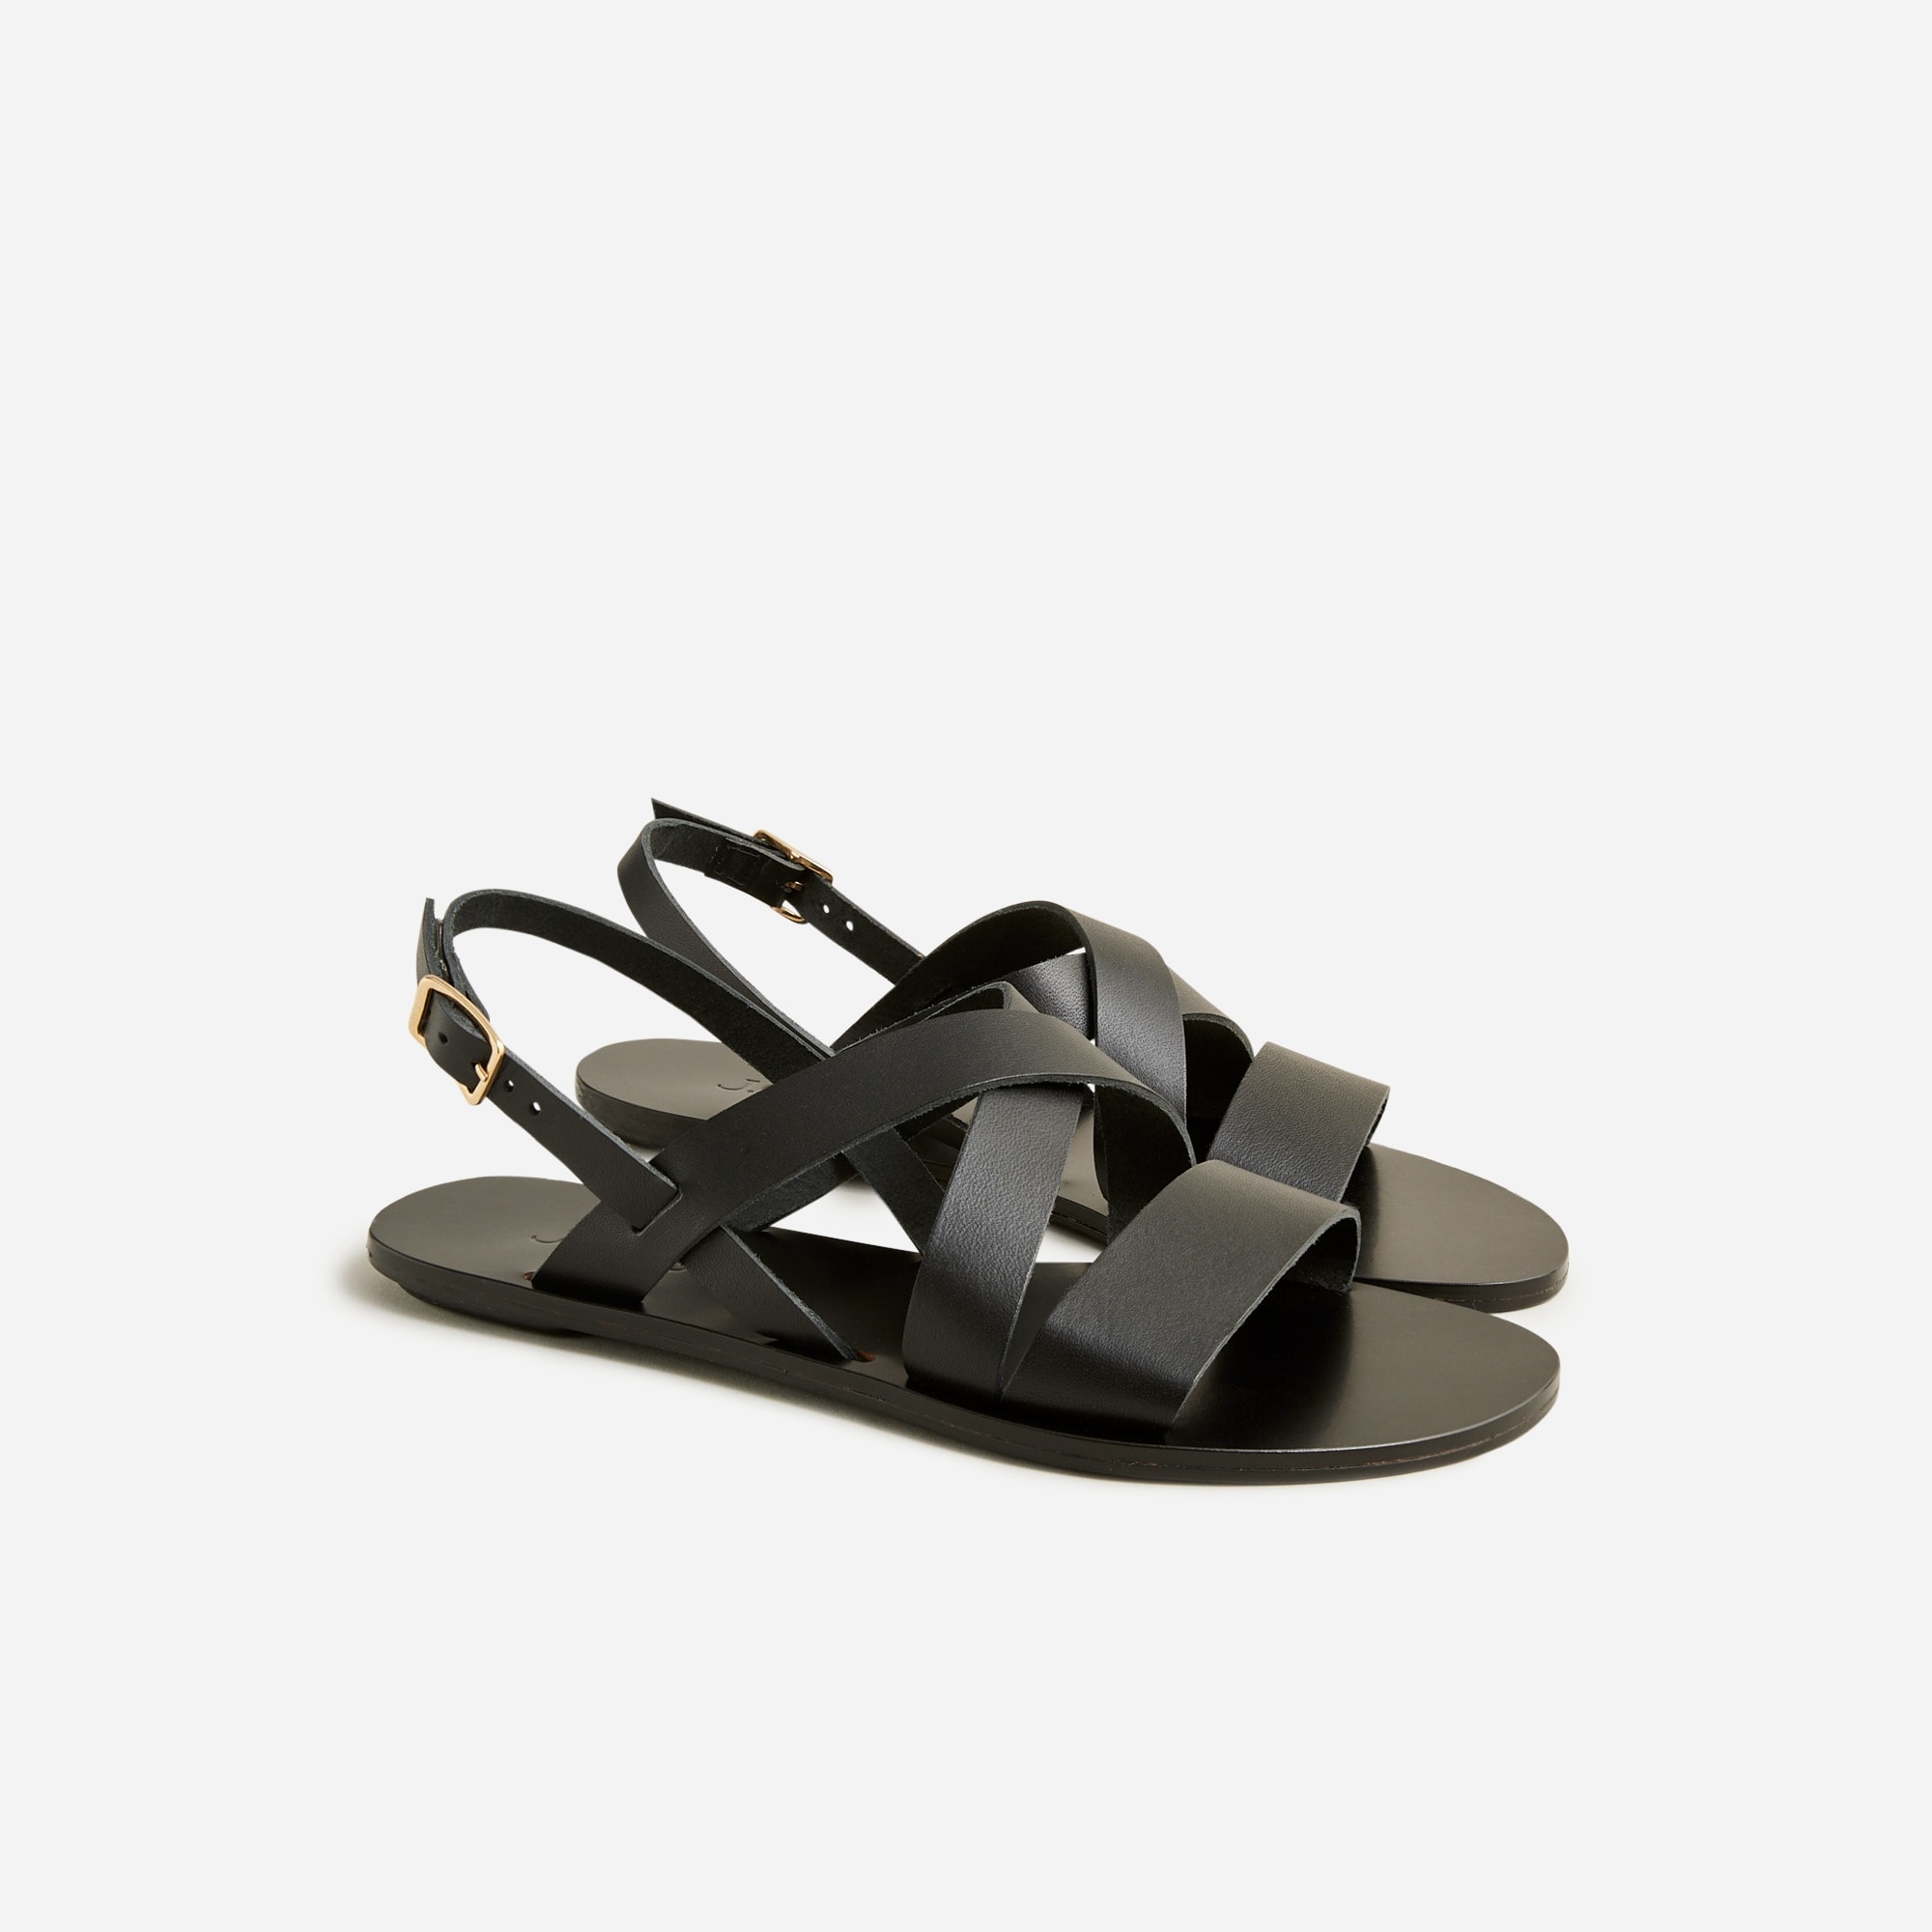  Carsen made-in-Italy slingback sandals in leather